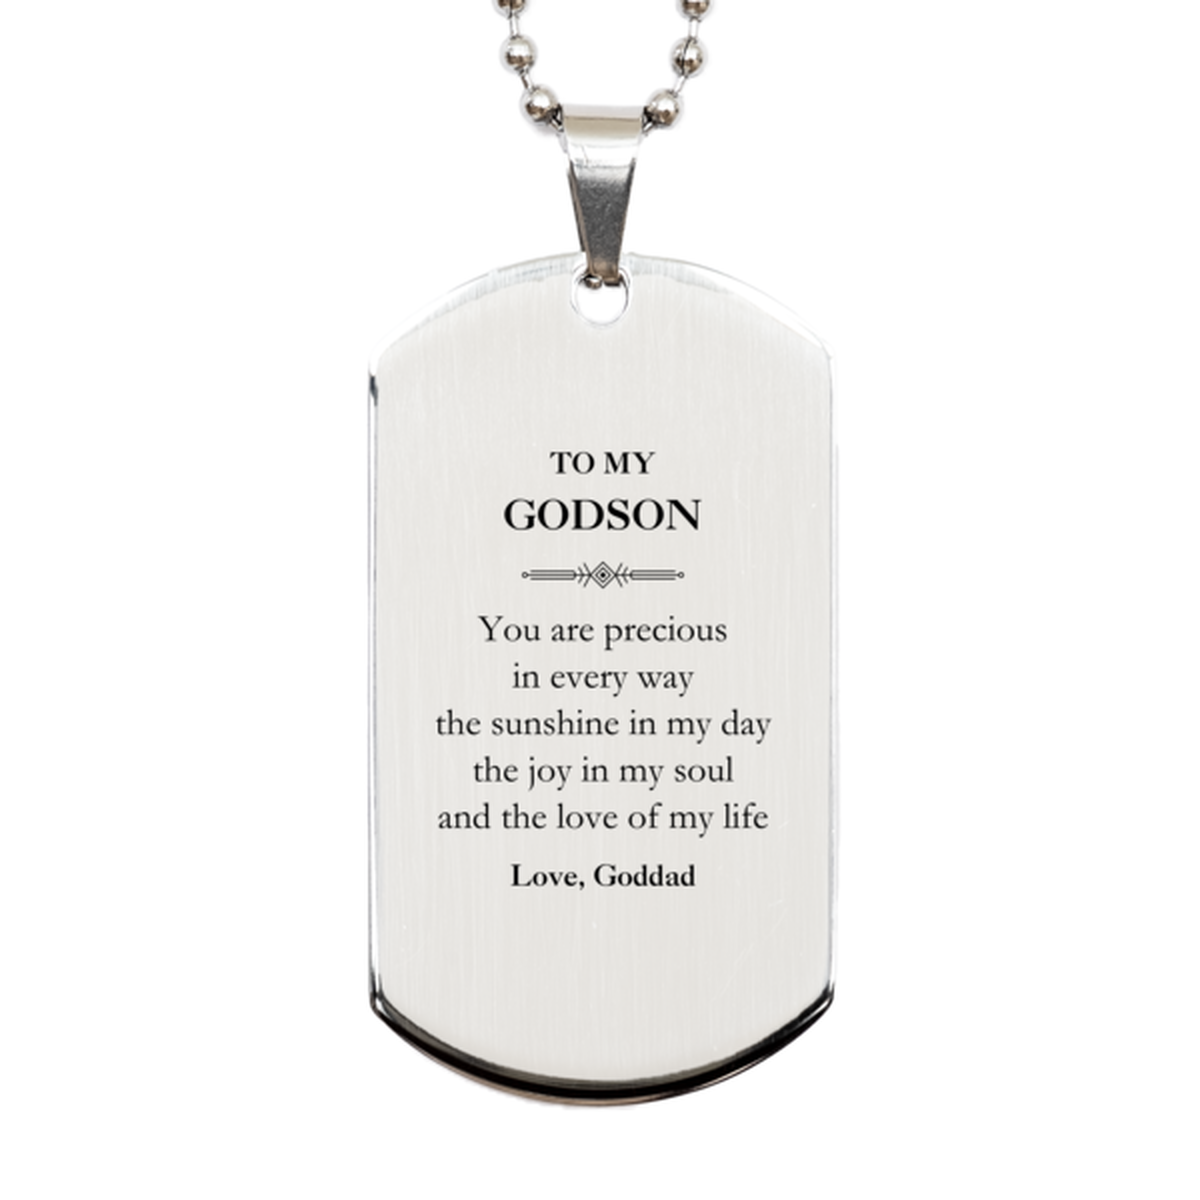 Graduation Gifts for Godson Silver Dog Tag Present from Goddad, Christmas Godson Birthday Gifts Godson You are precious in every way the sunshine in my day. Love, Goddad